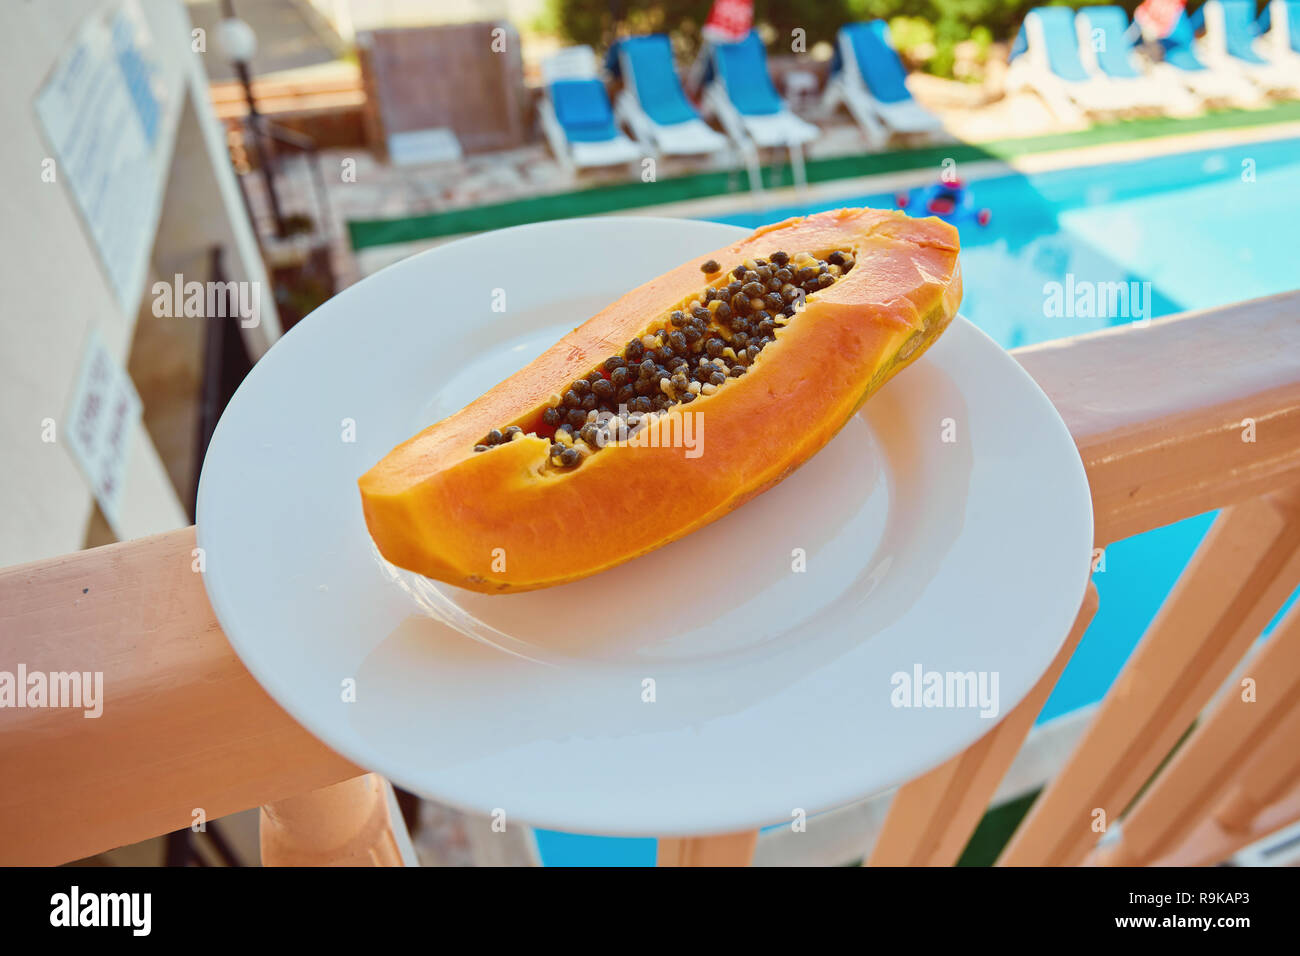 Papaya Fruit Half And Cut Pieces Close Up Photo On The Plate Stock Photo Alamy,Tiny House Communities In Georgia